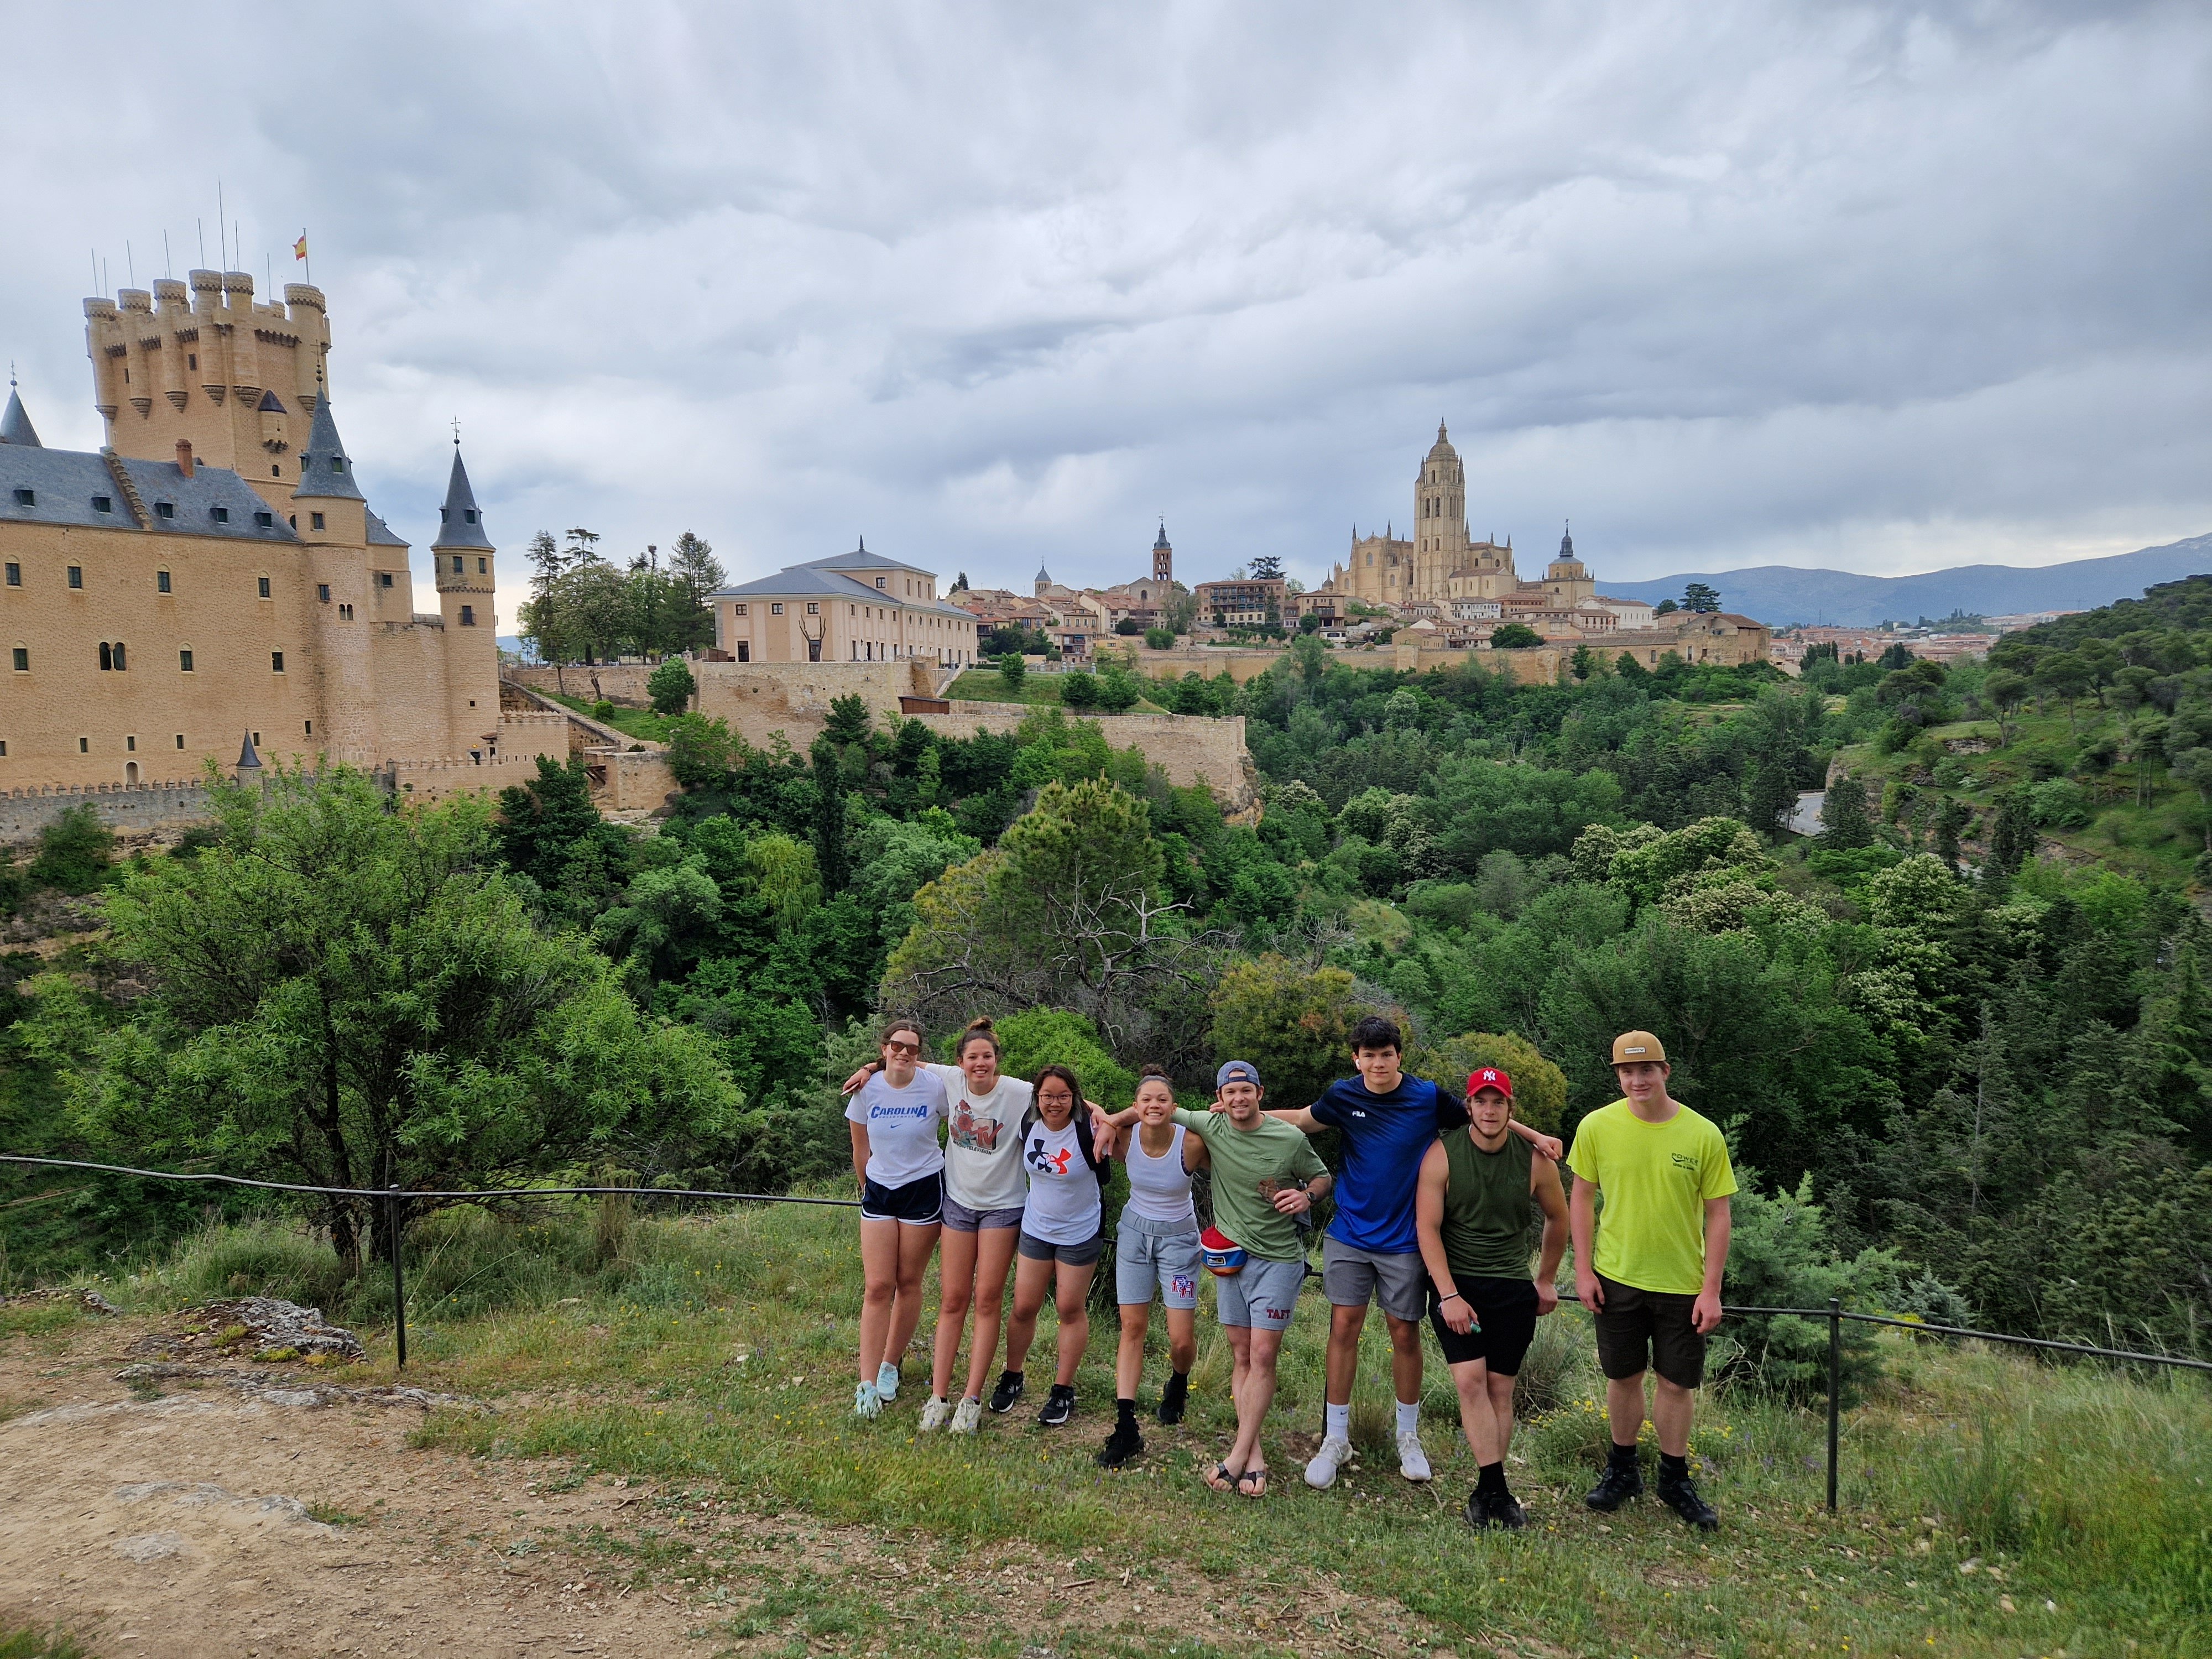 Proctor en Segovia students live with host families in Segovia, Spain